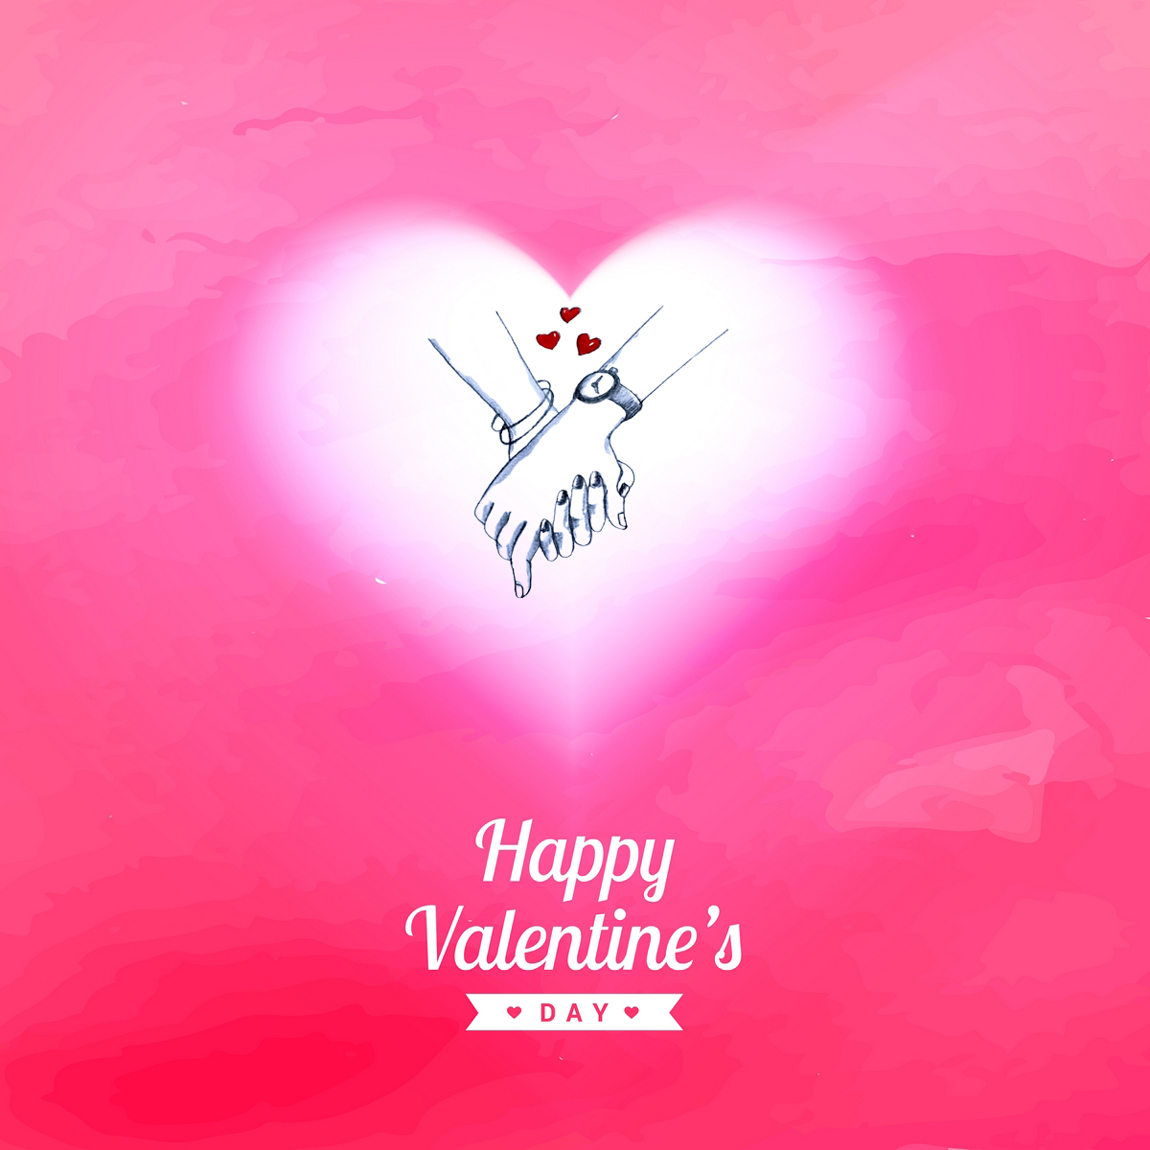 Happy Valentine’s Day wishes with Rose Background – Gift Card